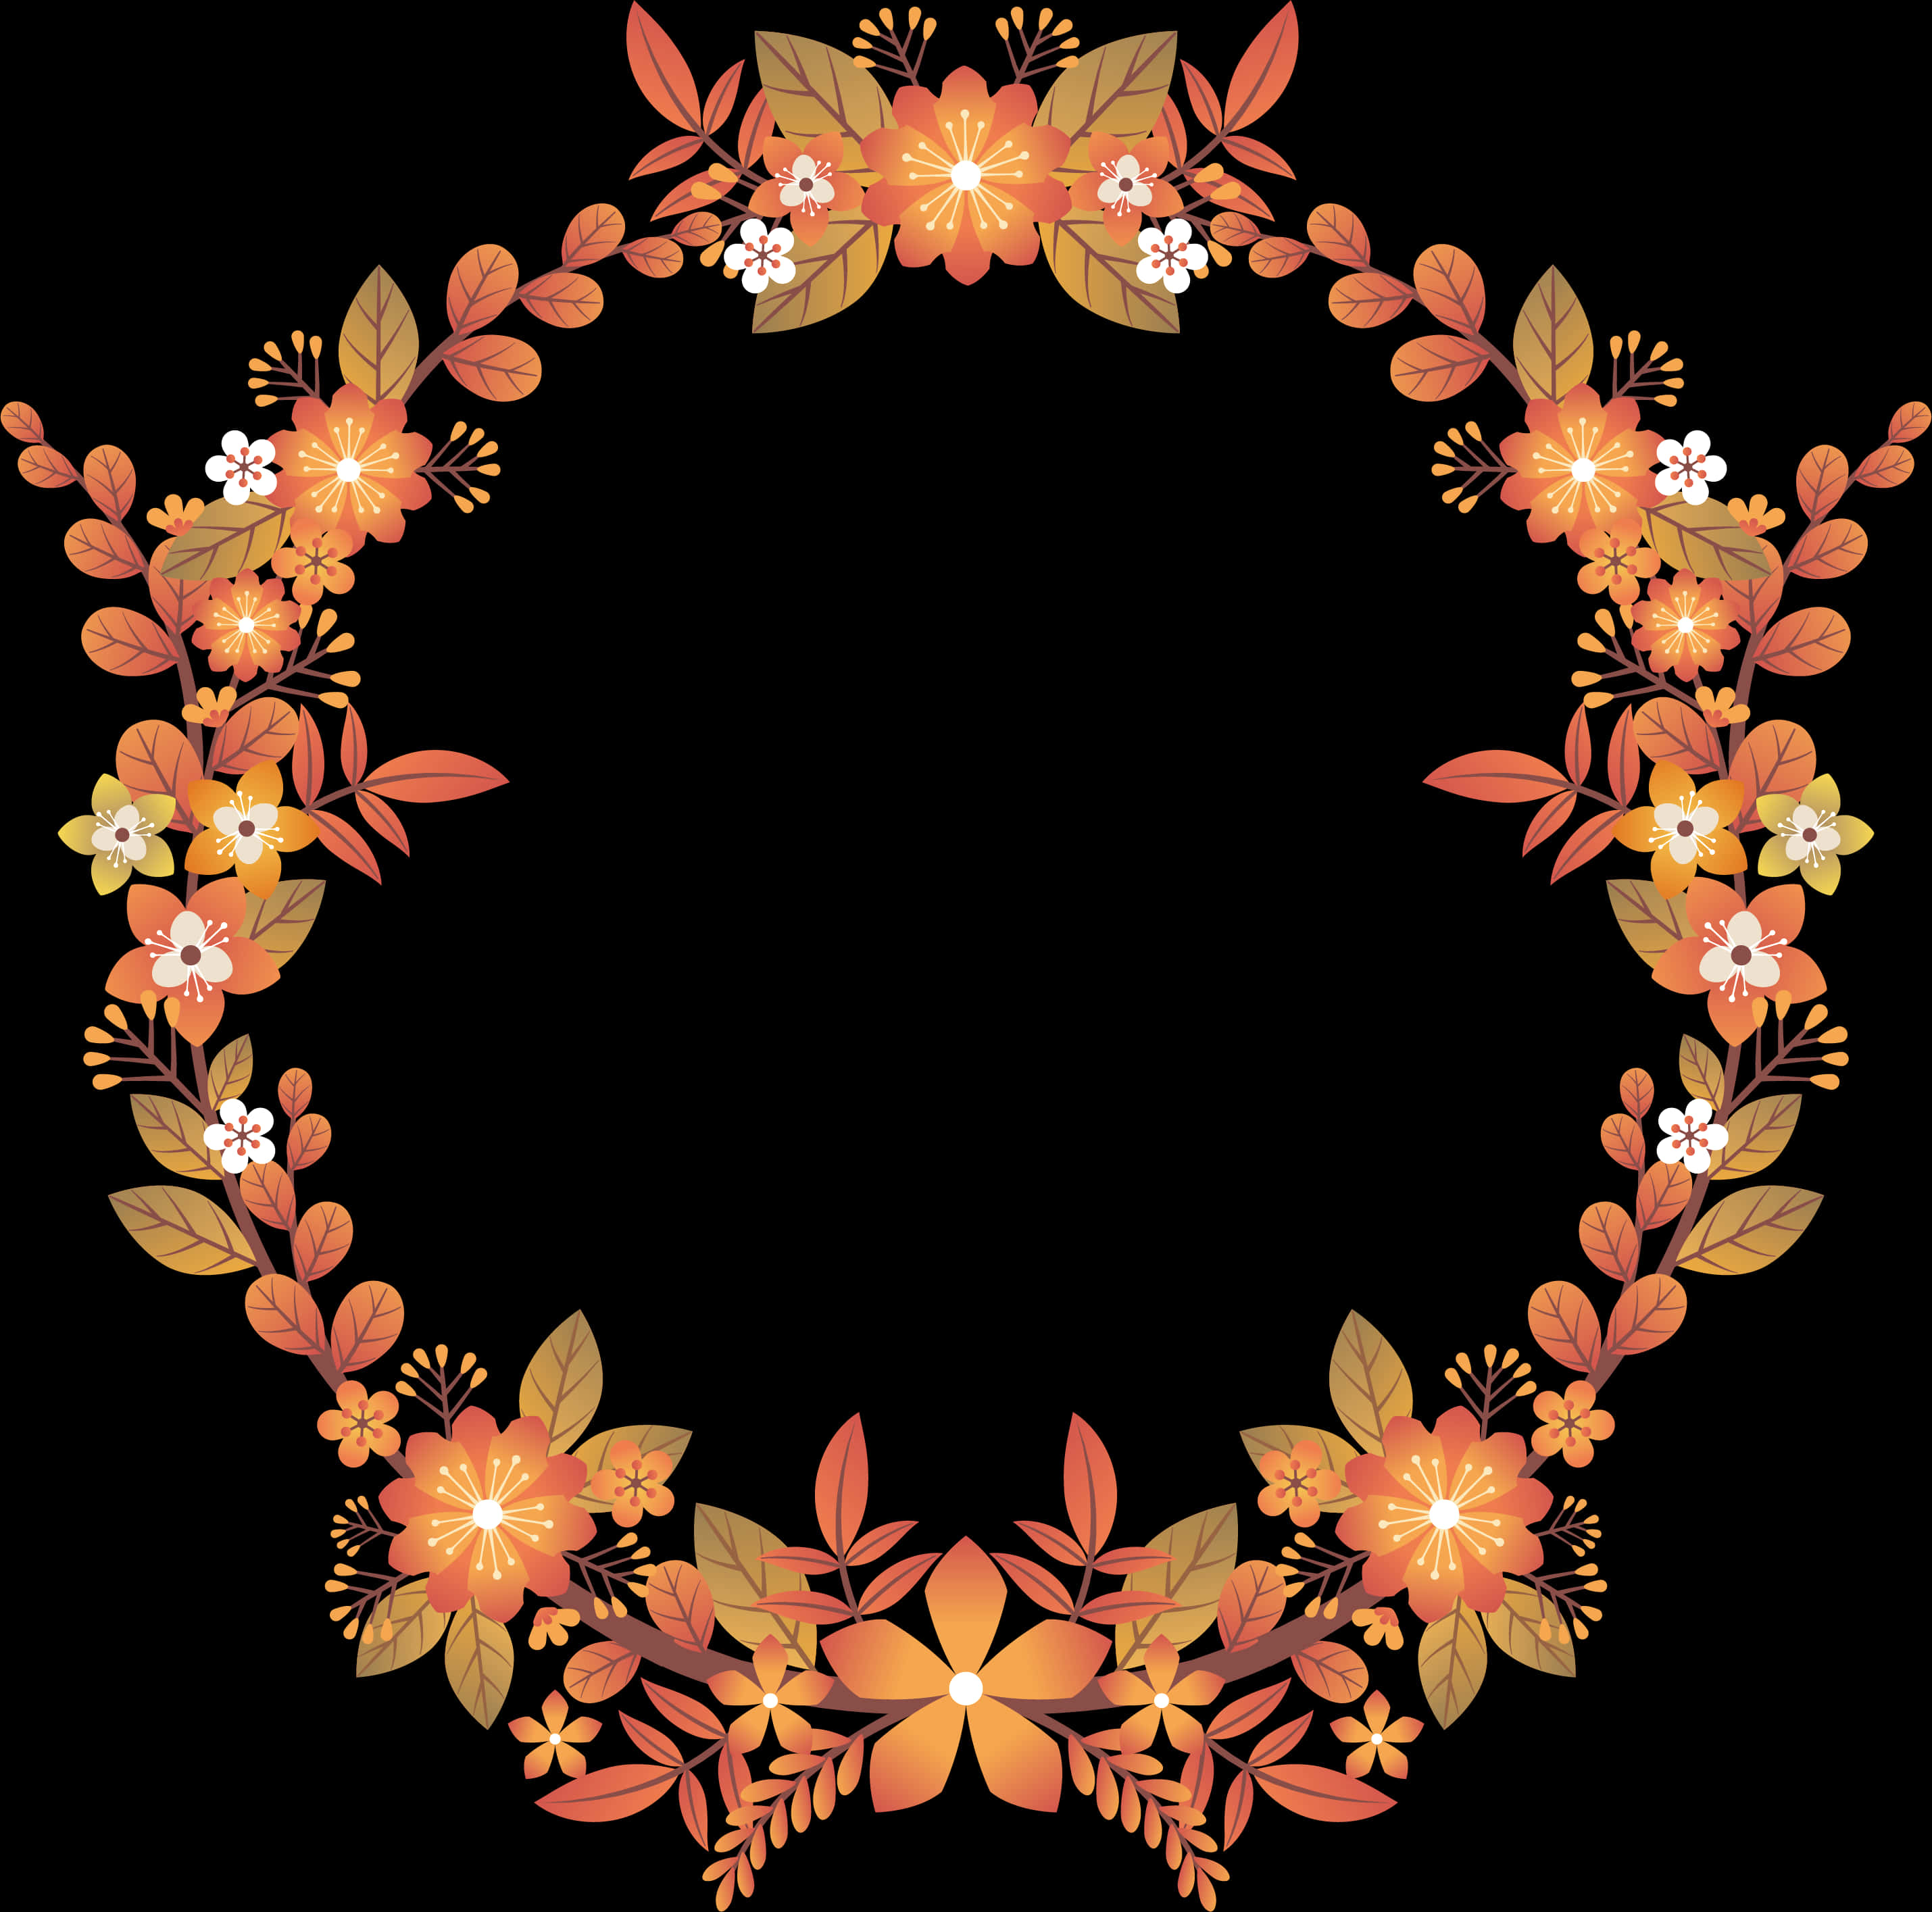 A Wreath Of Orange And White Flowers